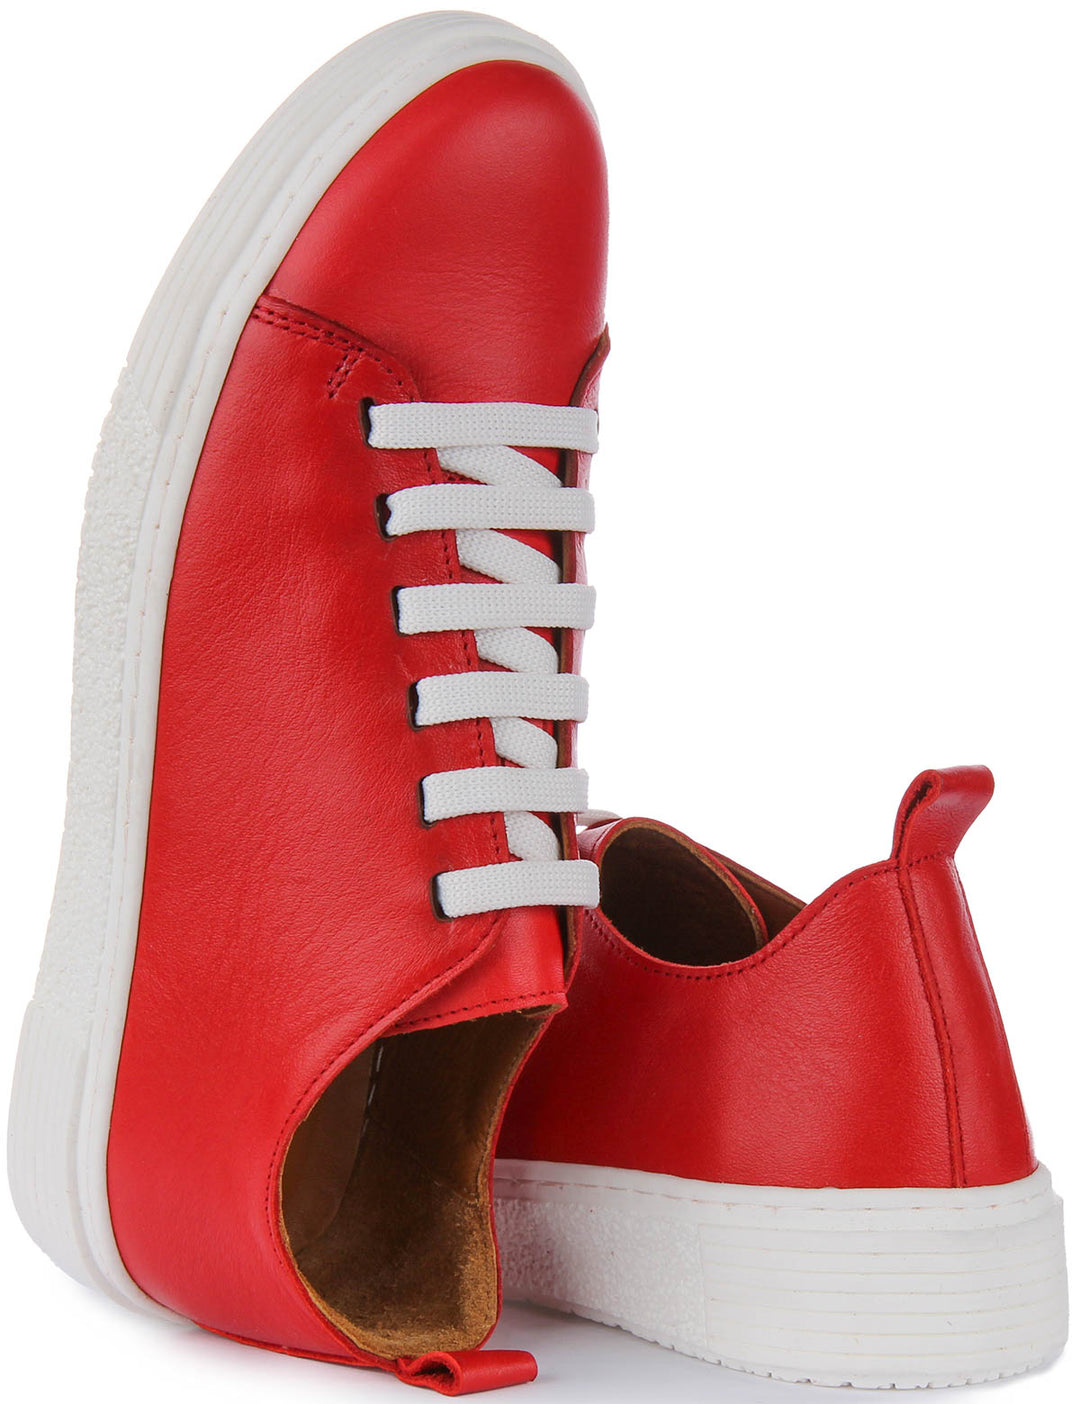 Diana Comfort Shoes In Red